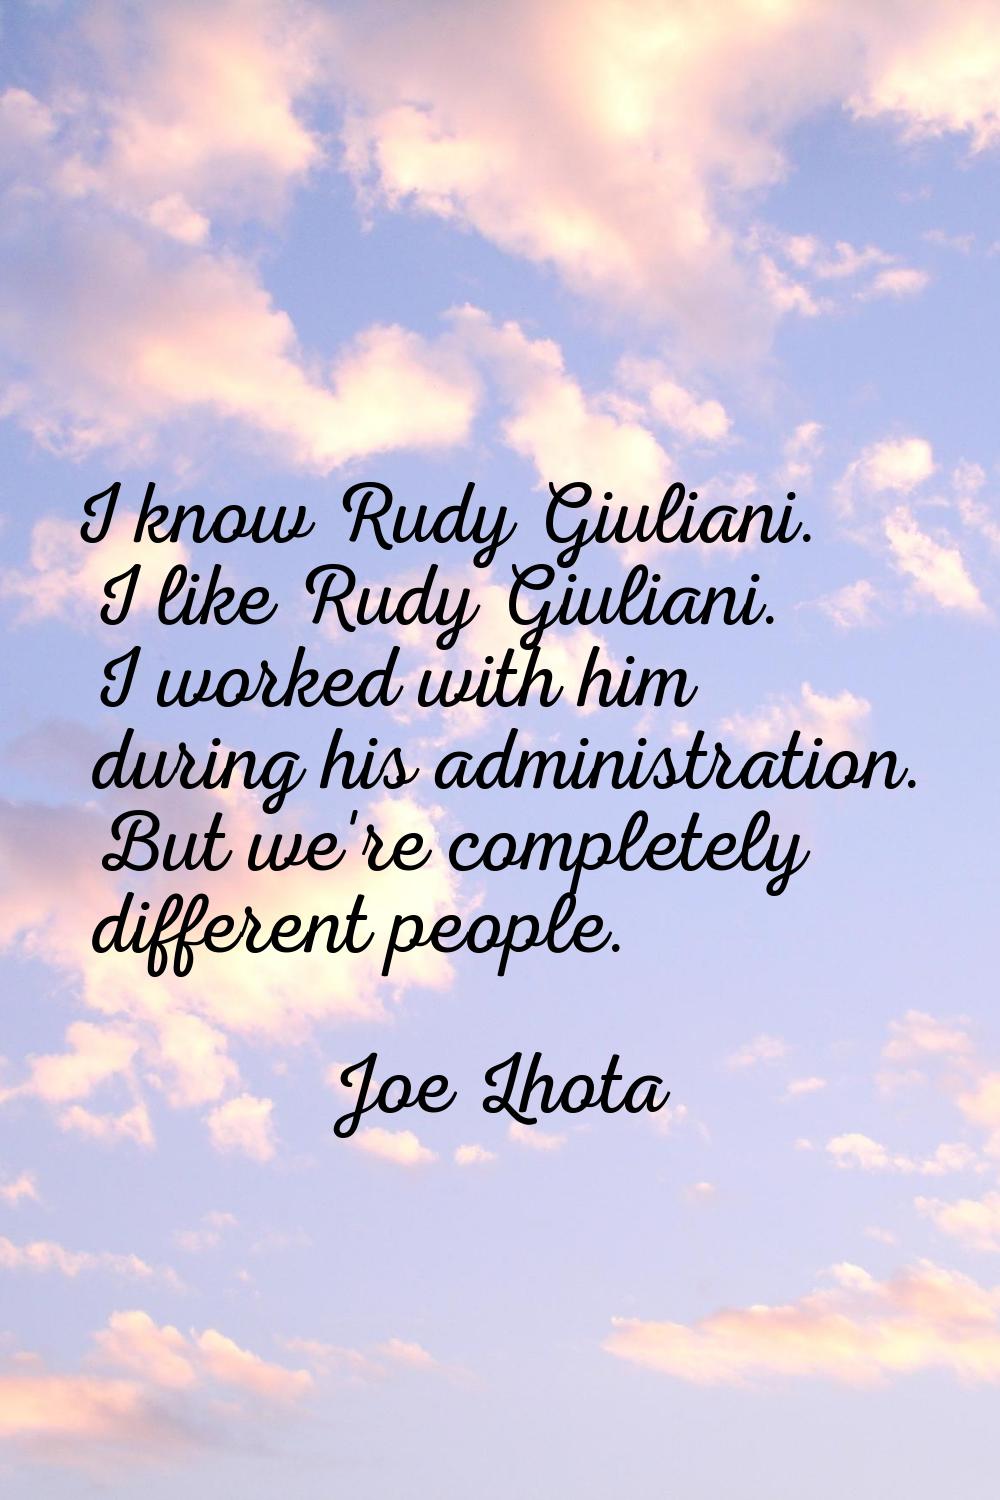 I know Rudy Giuliani. I like Rudy Giuliani. I worked with him during his administration. But we're 